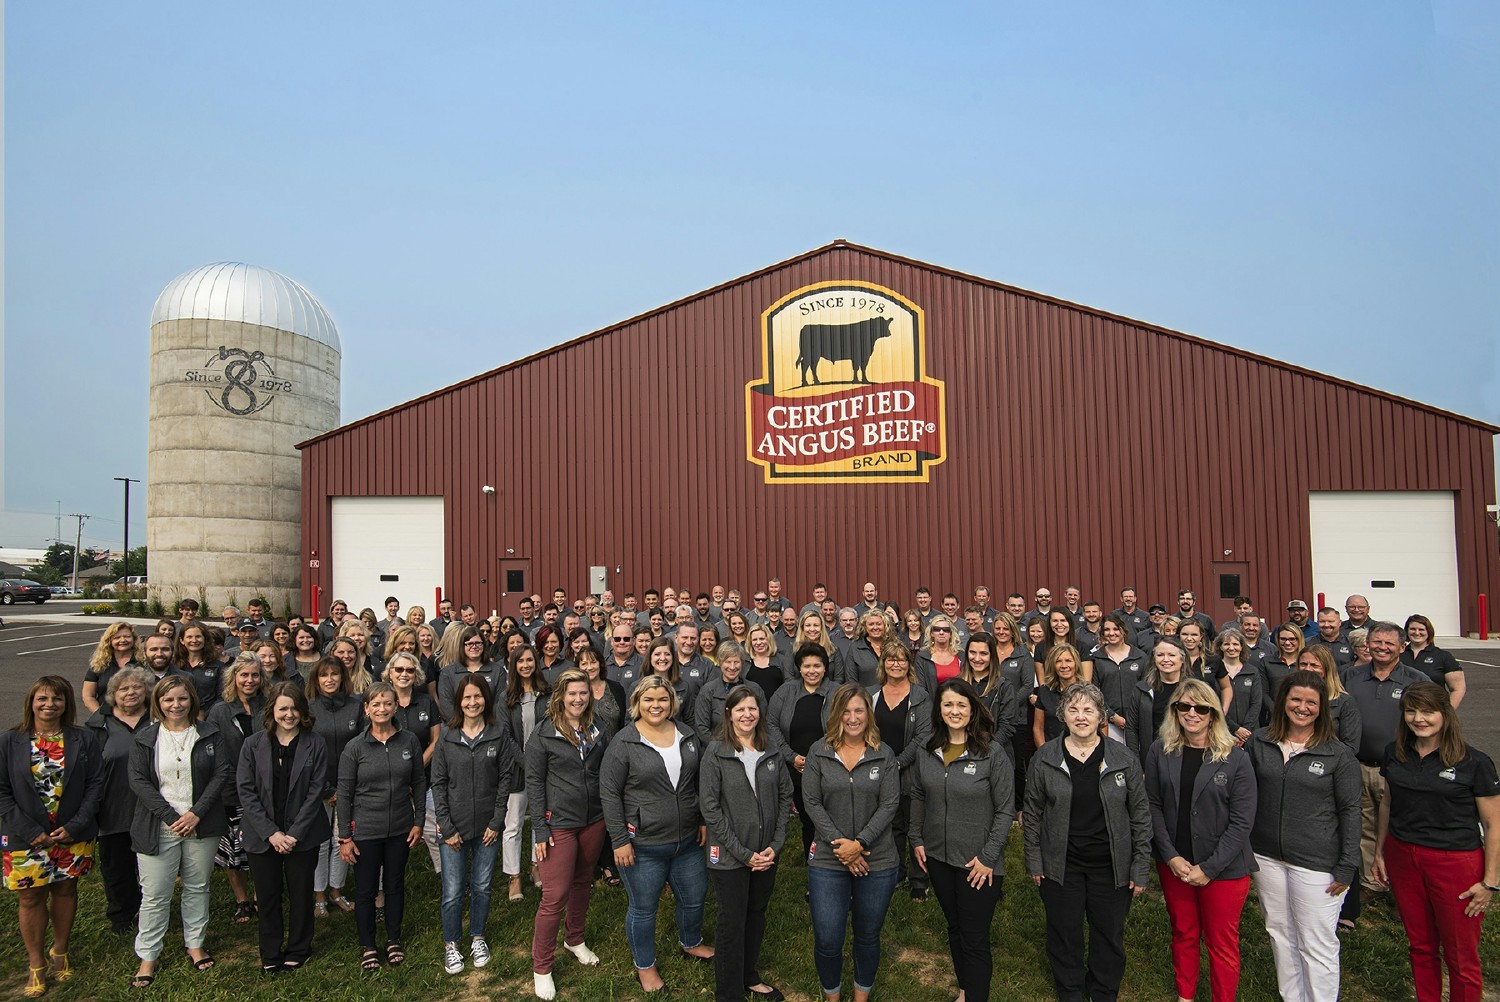 Certified Angus Beef welcomed staff to the new warehouse, which fulfills global customer needs for marketing solutions